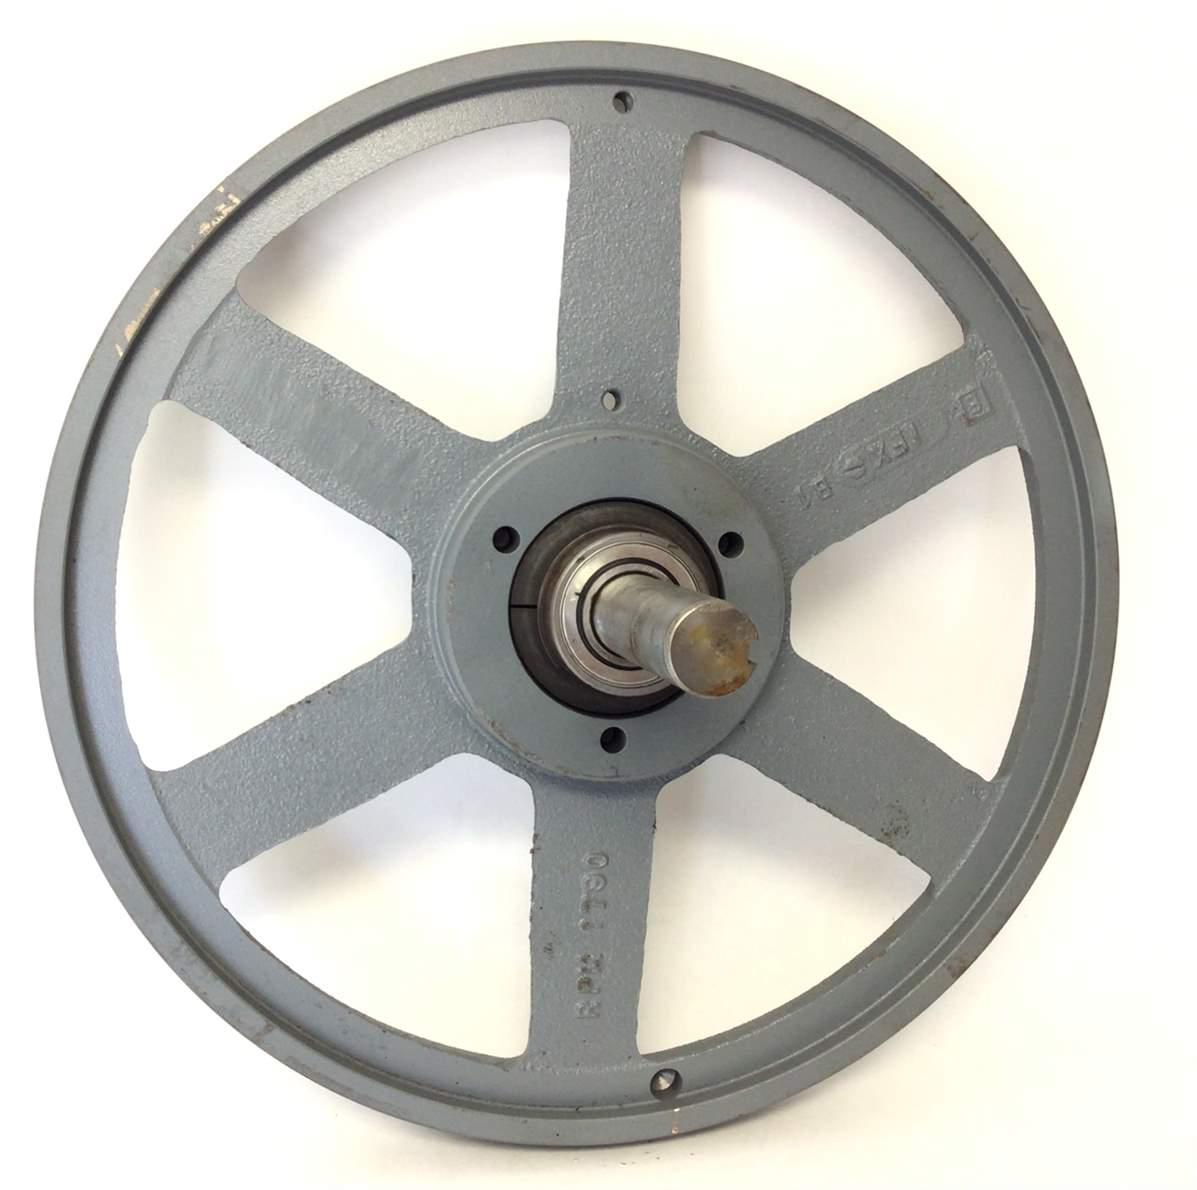 Pulley Assembly RPM 1790 (Used)